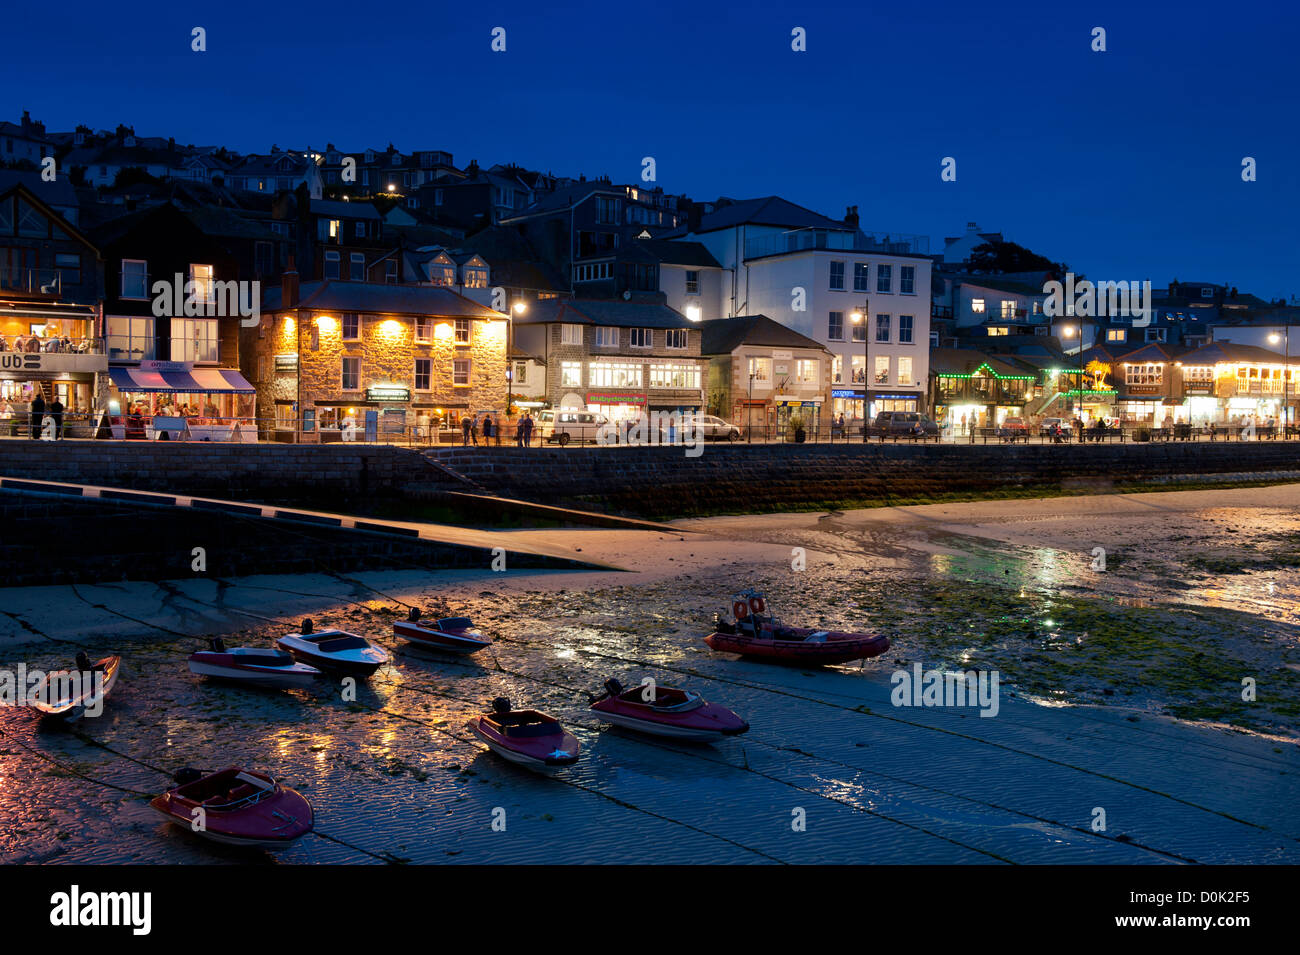 A view of bars and restaurants along the shore in St Ives at night. Stock Photo